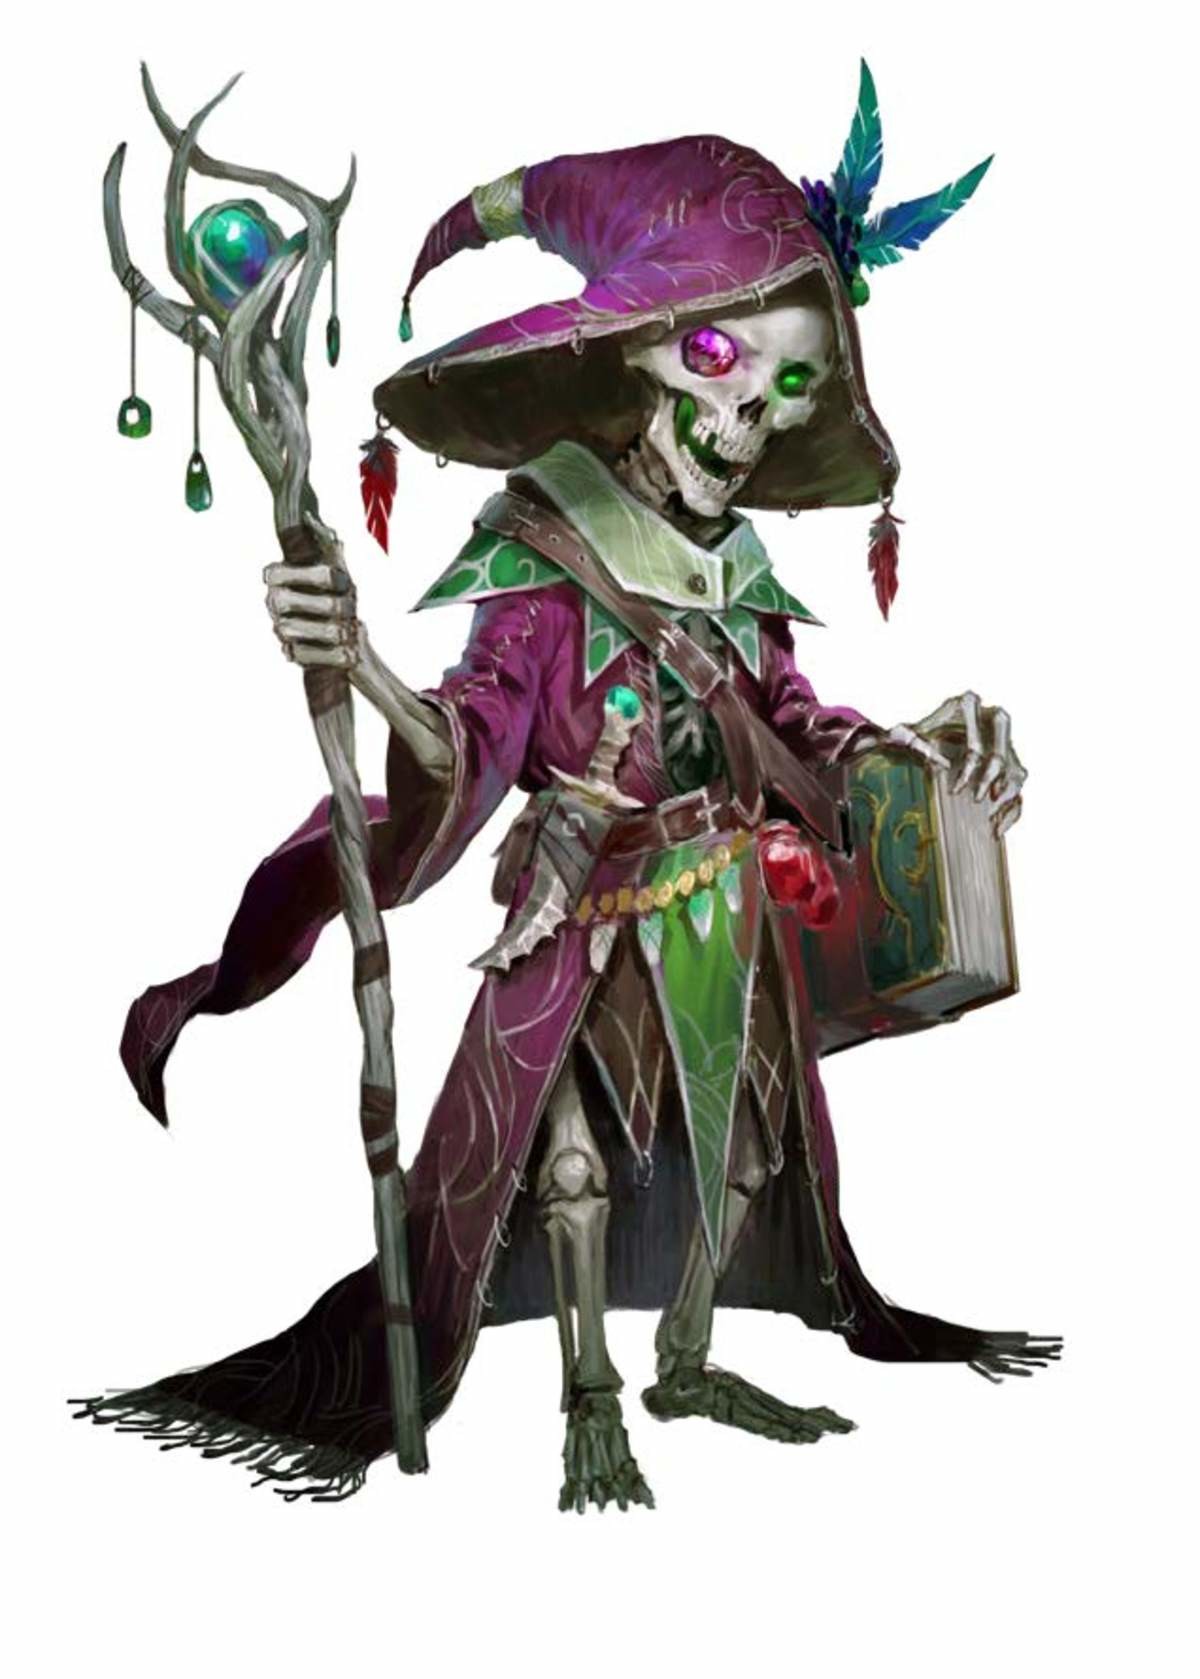 PF2e Book of the Dead - Character Options. I received my PDF for the new Pathfinder 2e Book of the Dead, so I thought I'd share some quick stuff, starting out w